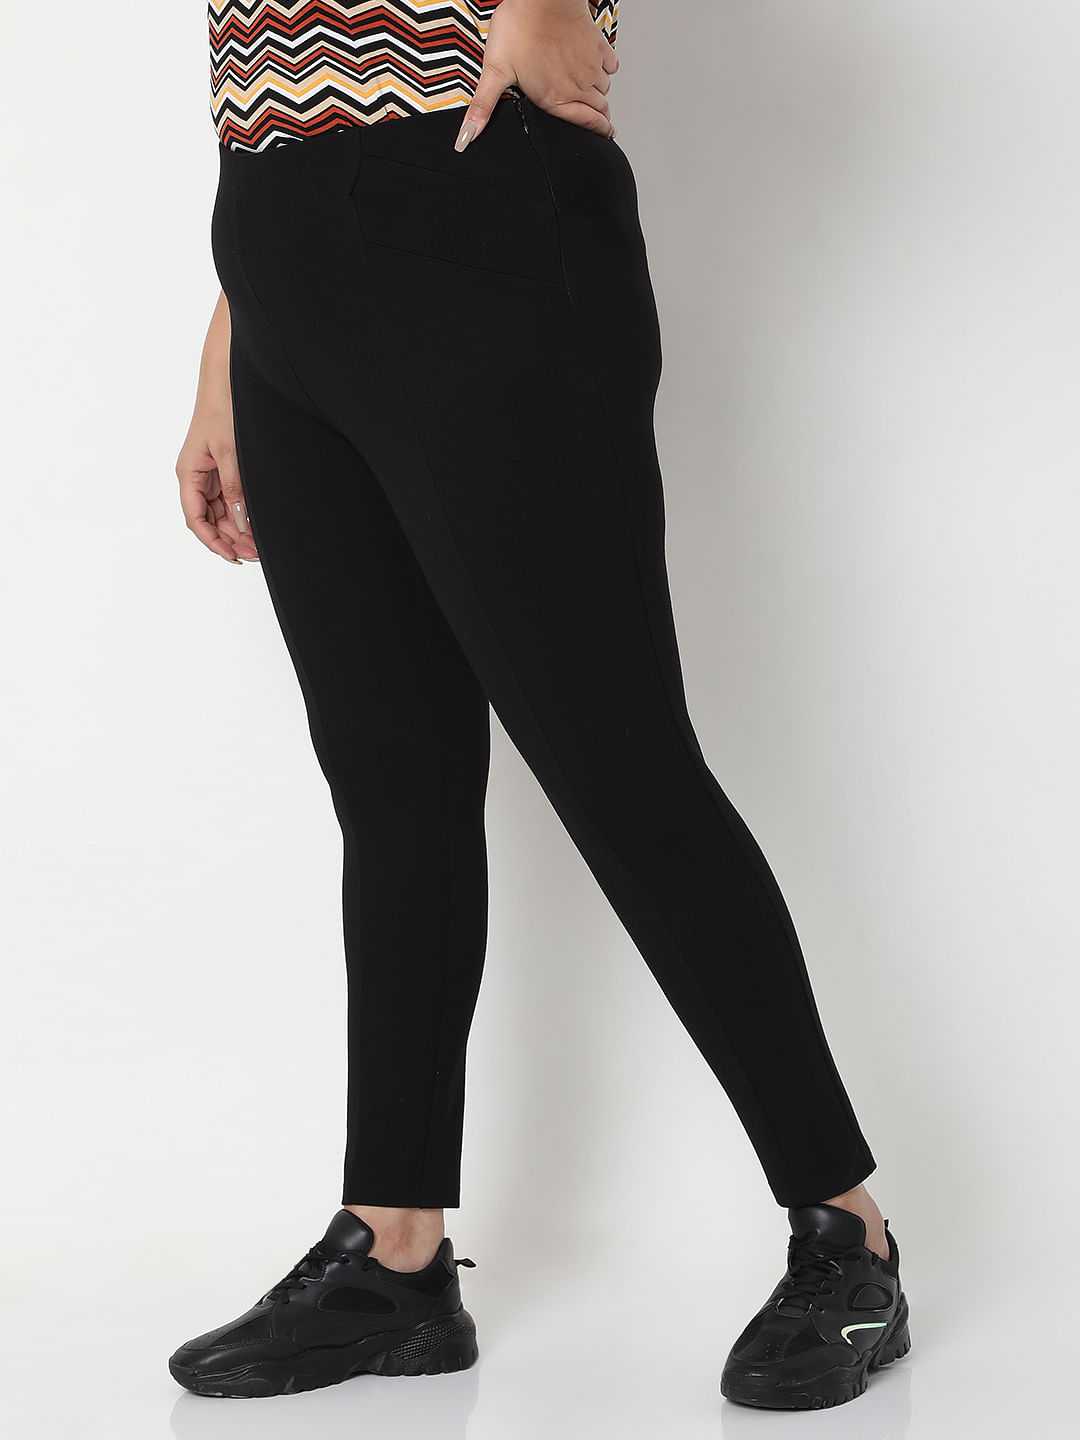 short black cotton leggings with hole design and nice seams Exception Aswad